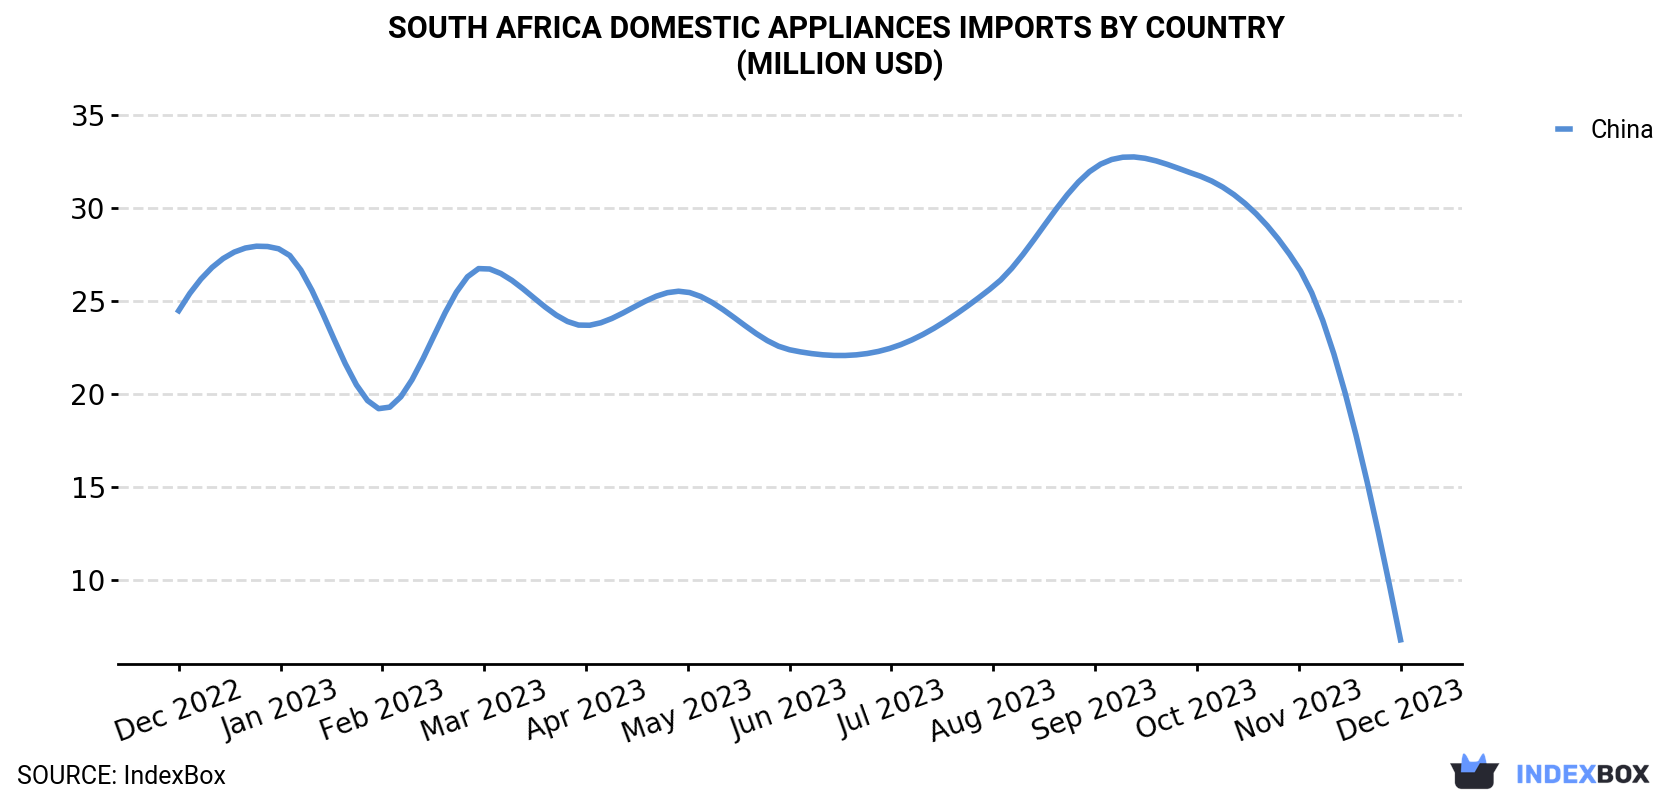 South Africa Domestic Appliances Imports By Country (Million USD)